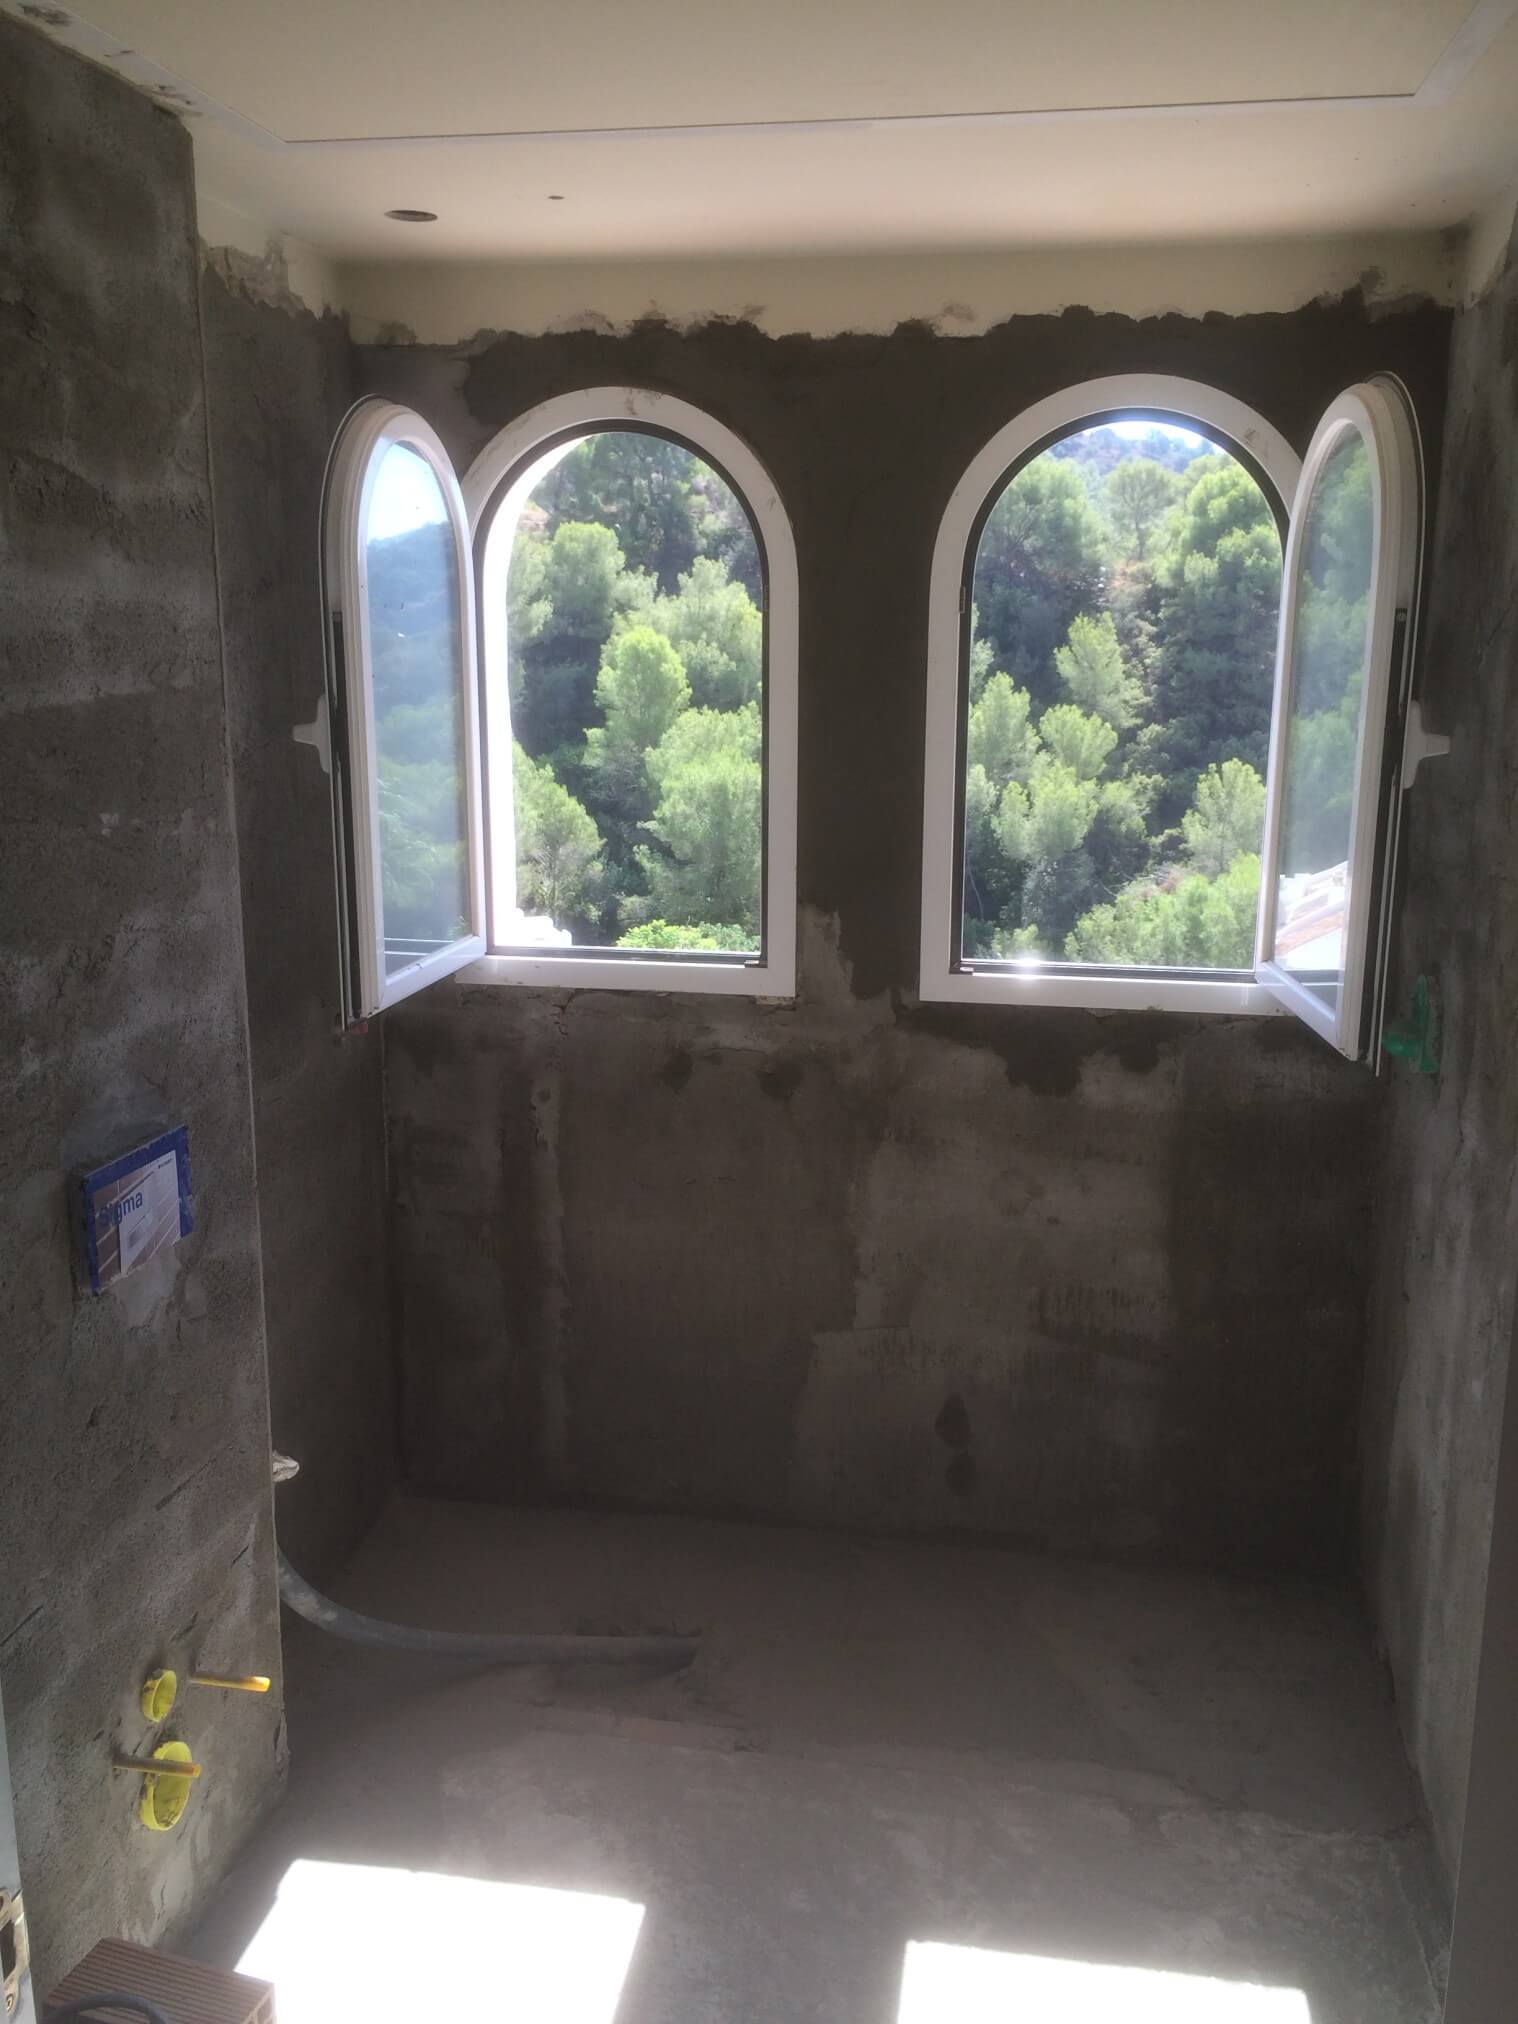 Plastered walls with windows